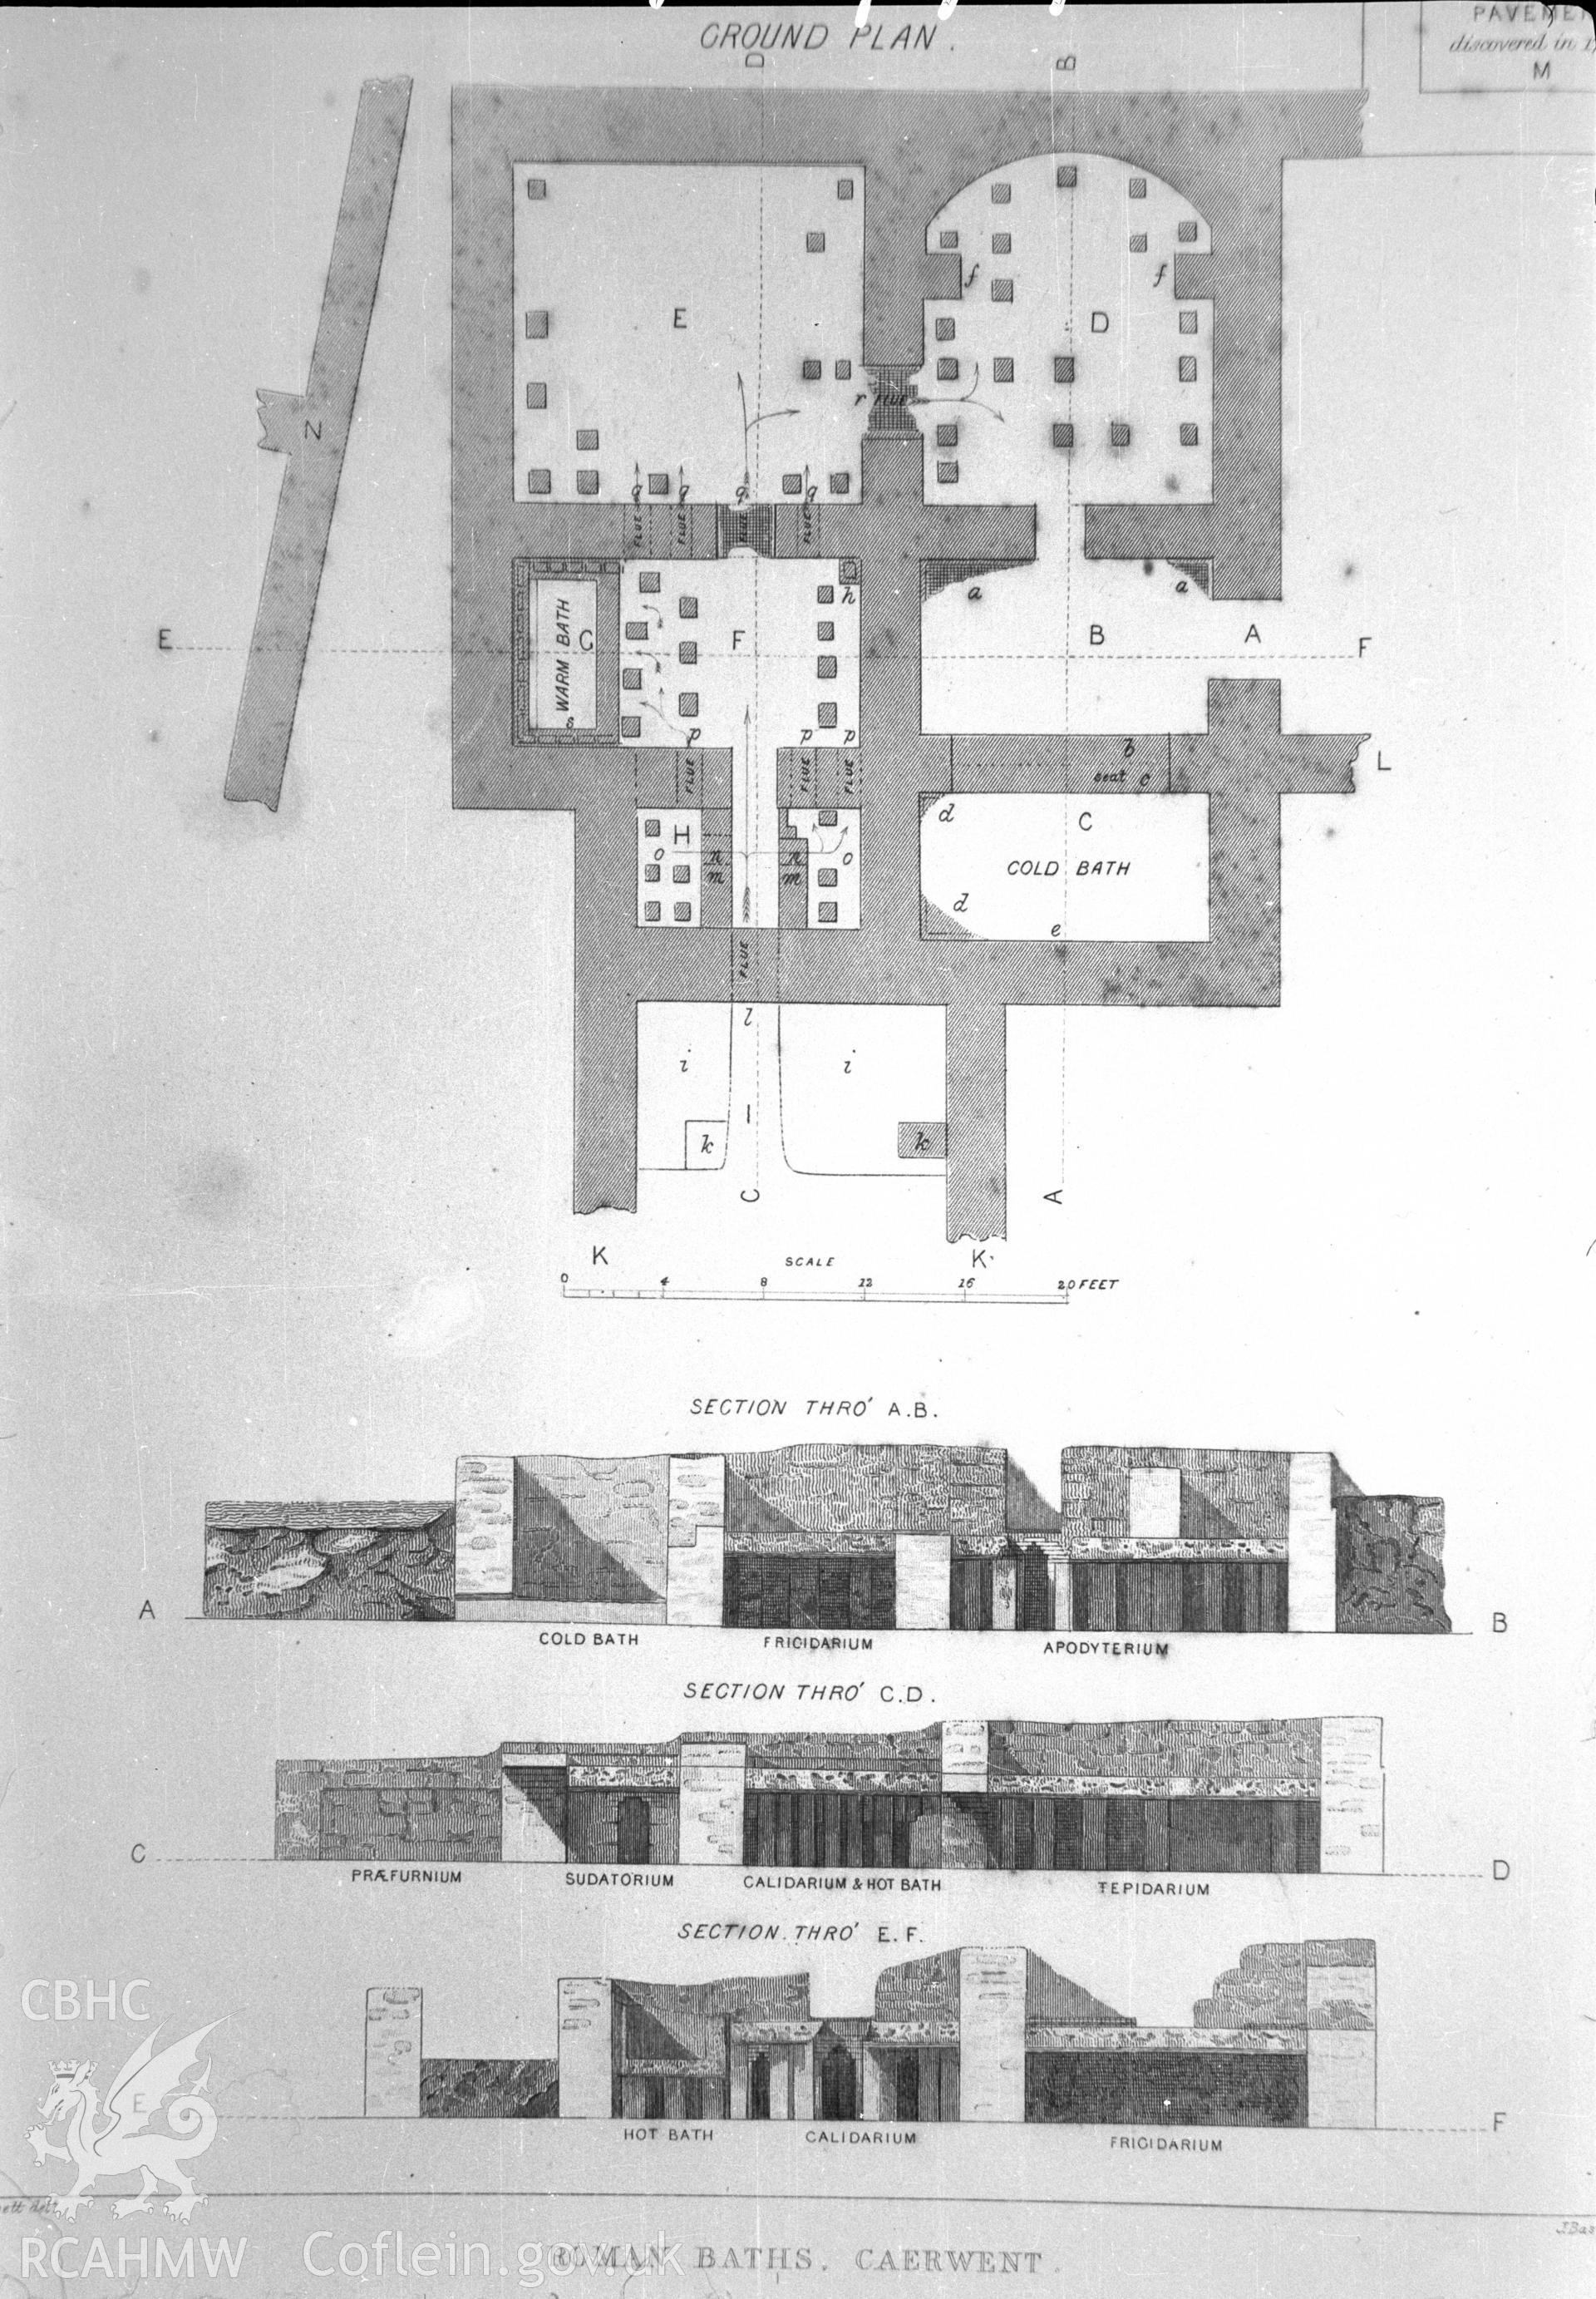 Digital copy of a nitrate negative of a sketch depicting a ground plan of the roman baths at Caerwent, by Ordnance Survey.